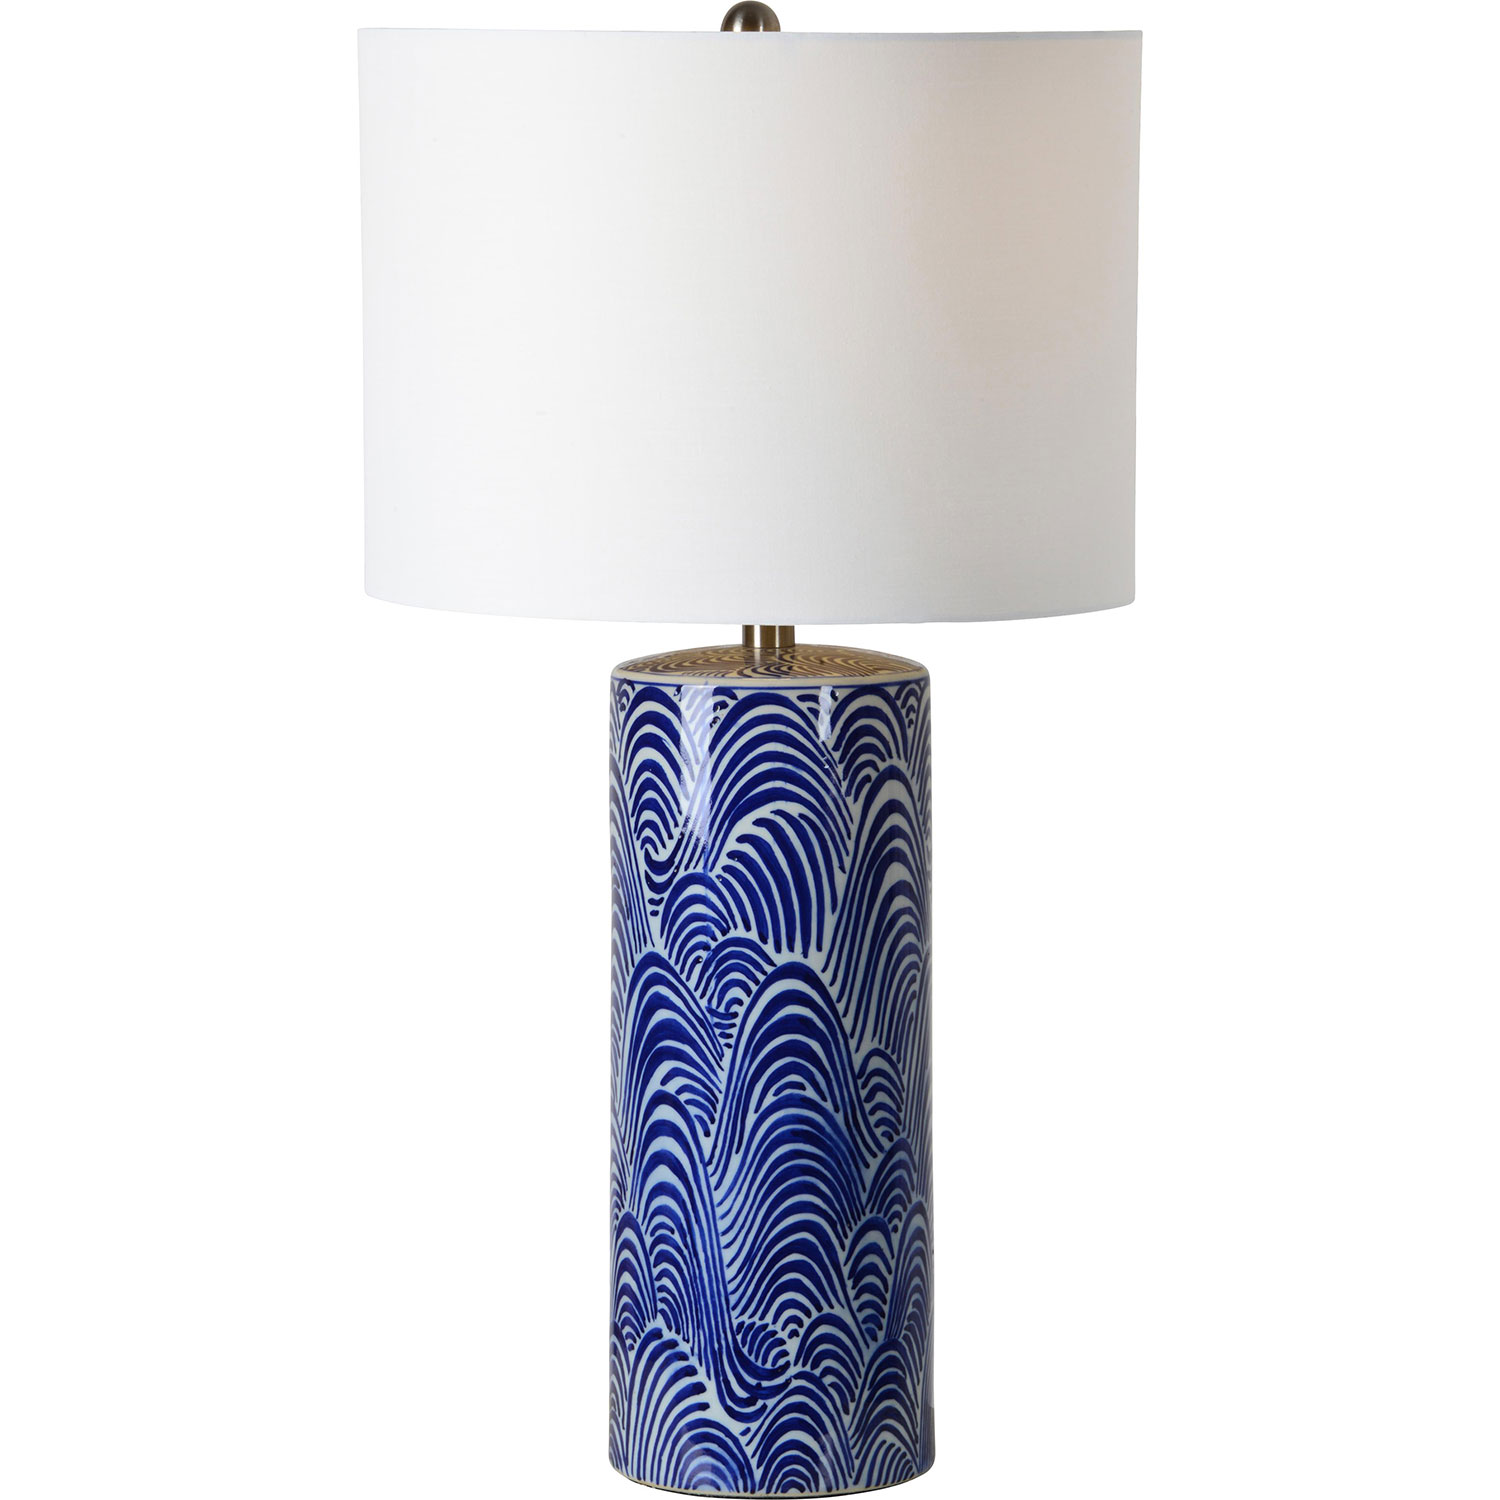 Ren-Wil Stafford Table Lamp - Blue/White